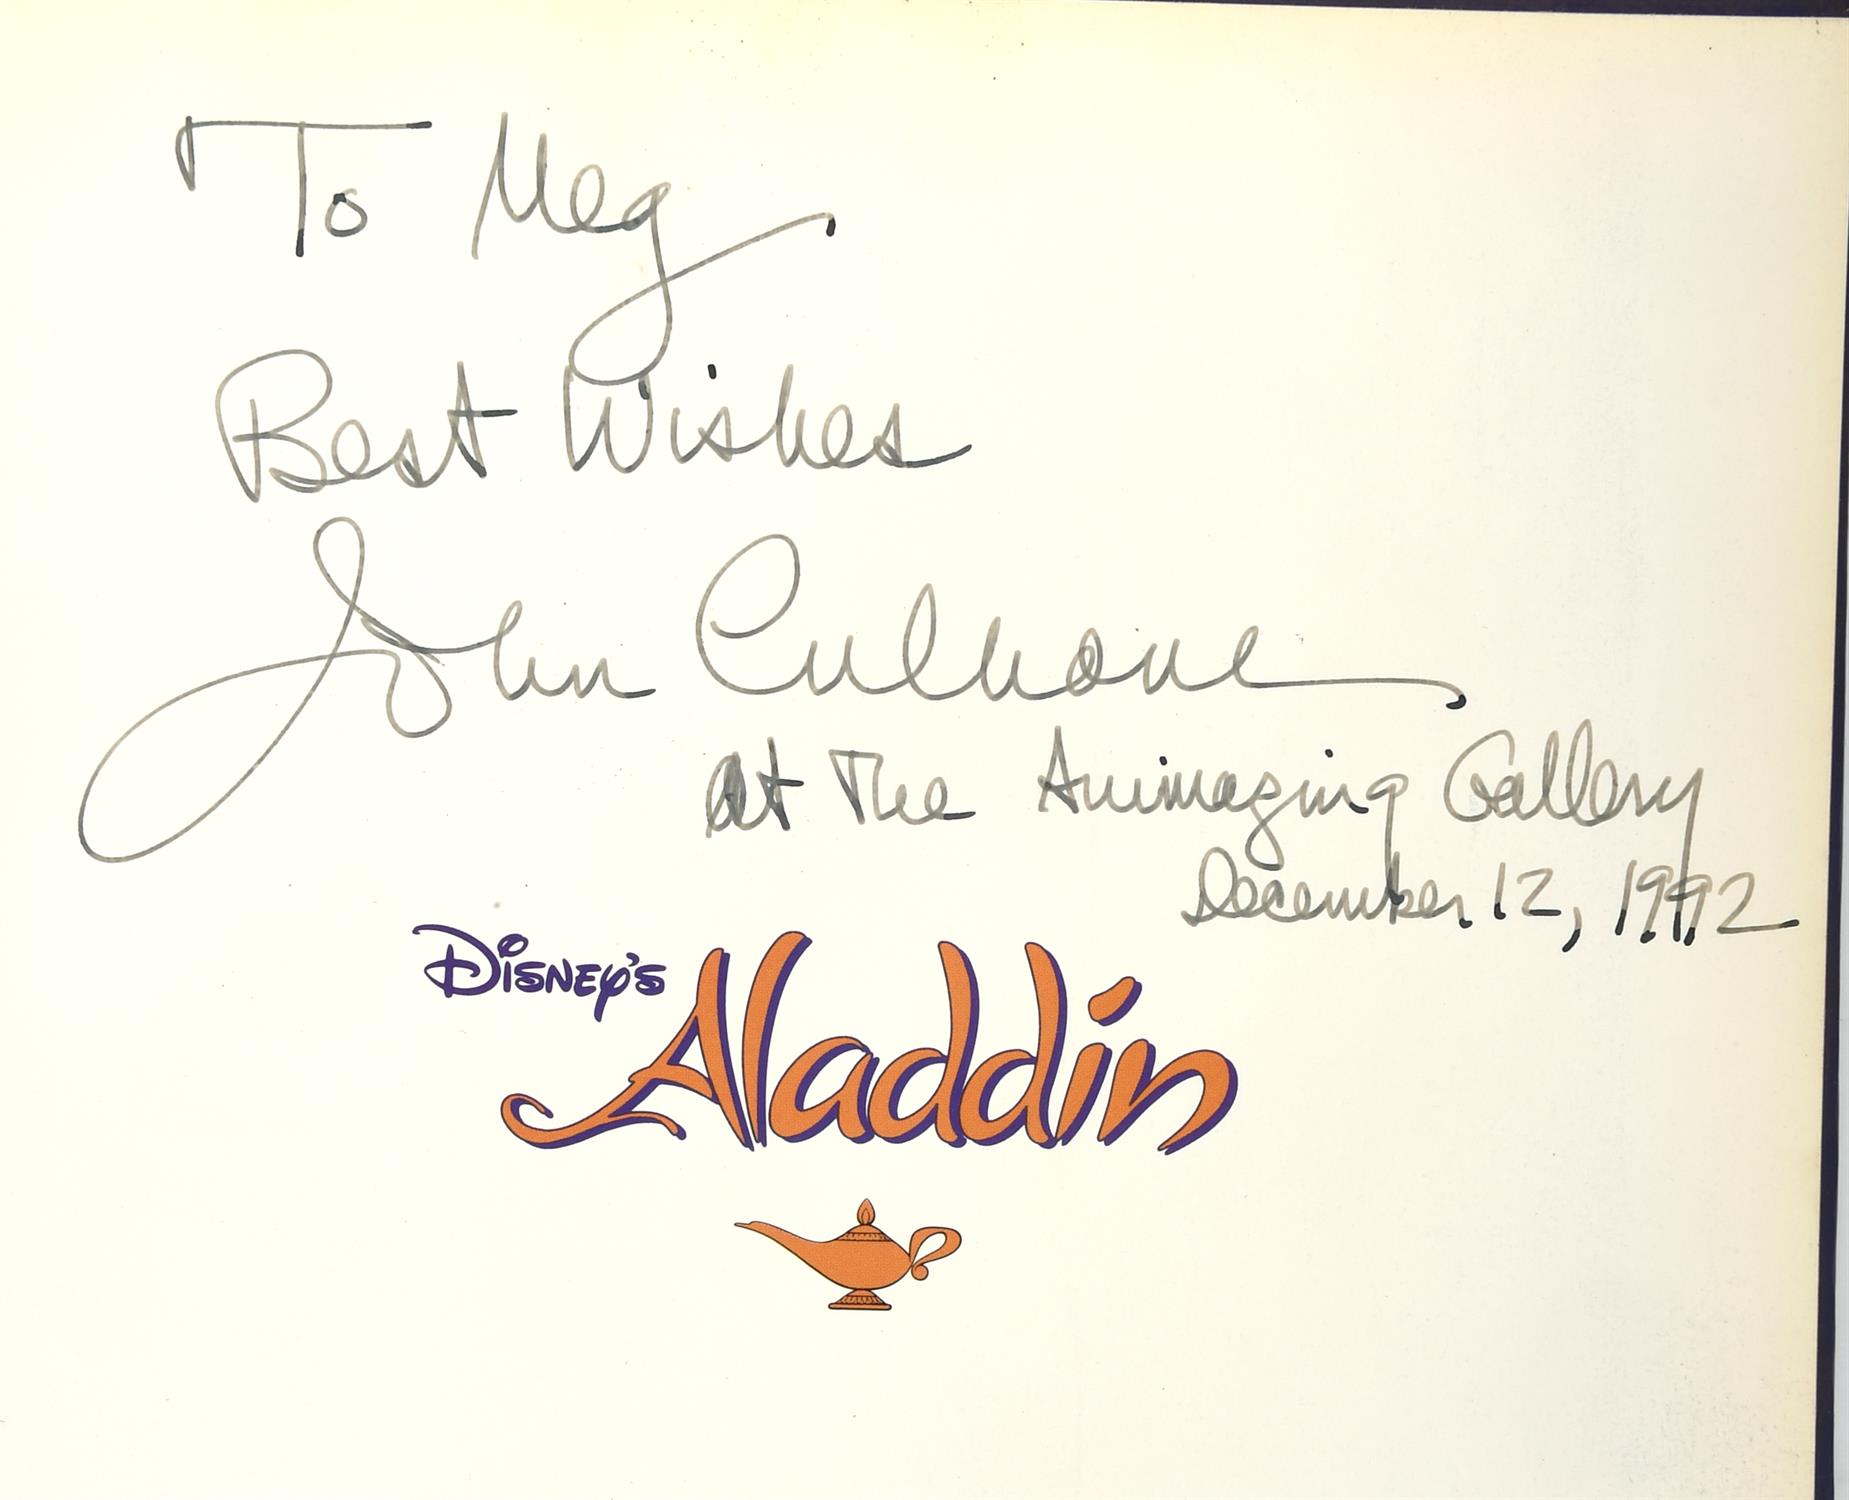 Walt Disney, Animation, and related – Five first edition hardback books, three of which are Signed - Image 2 of 4